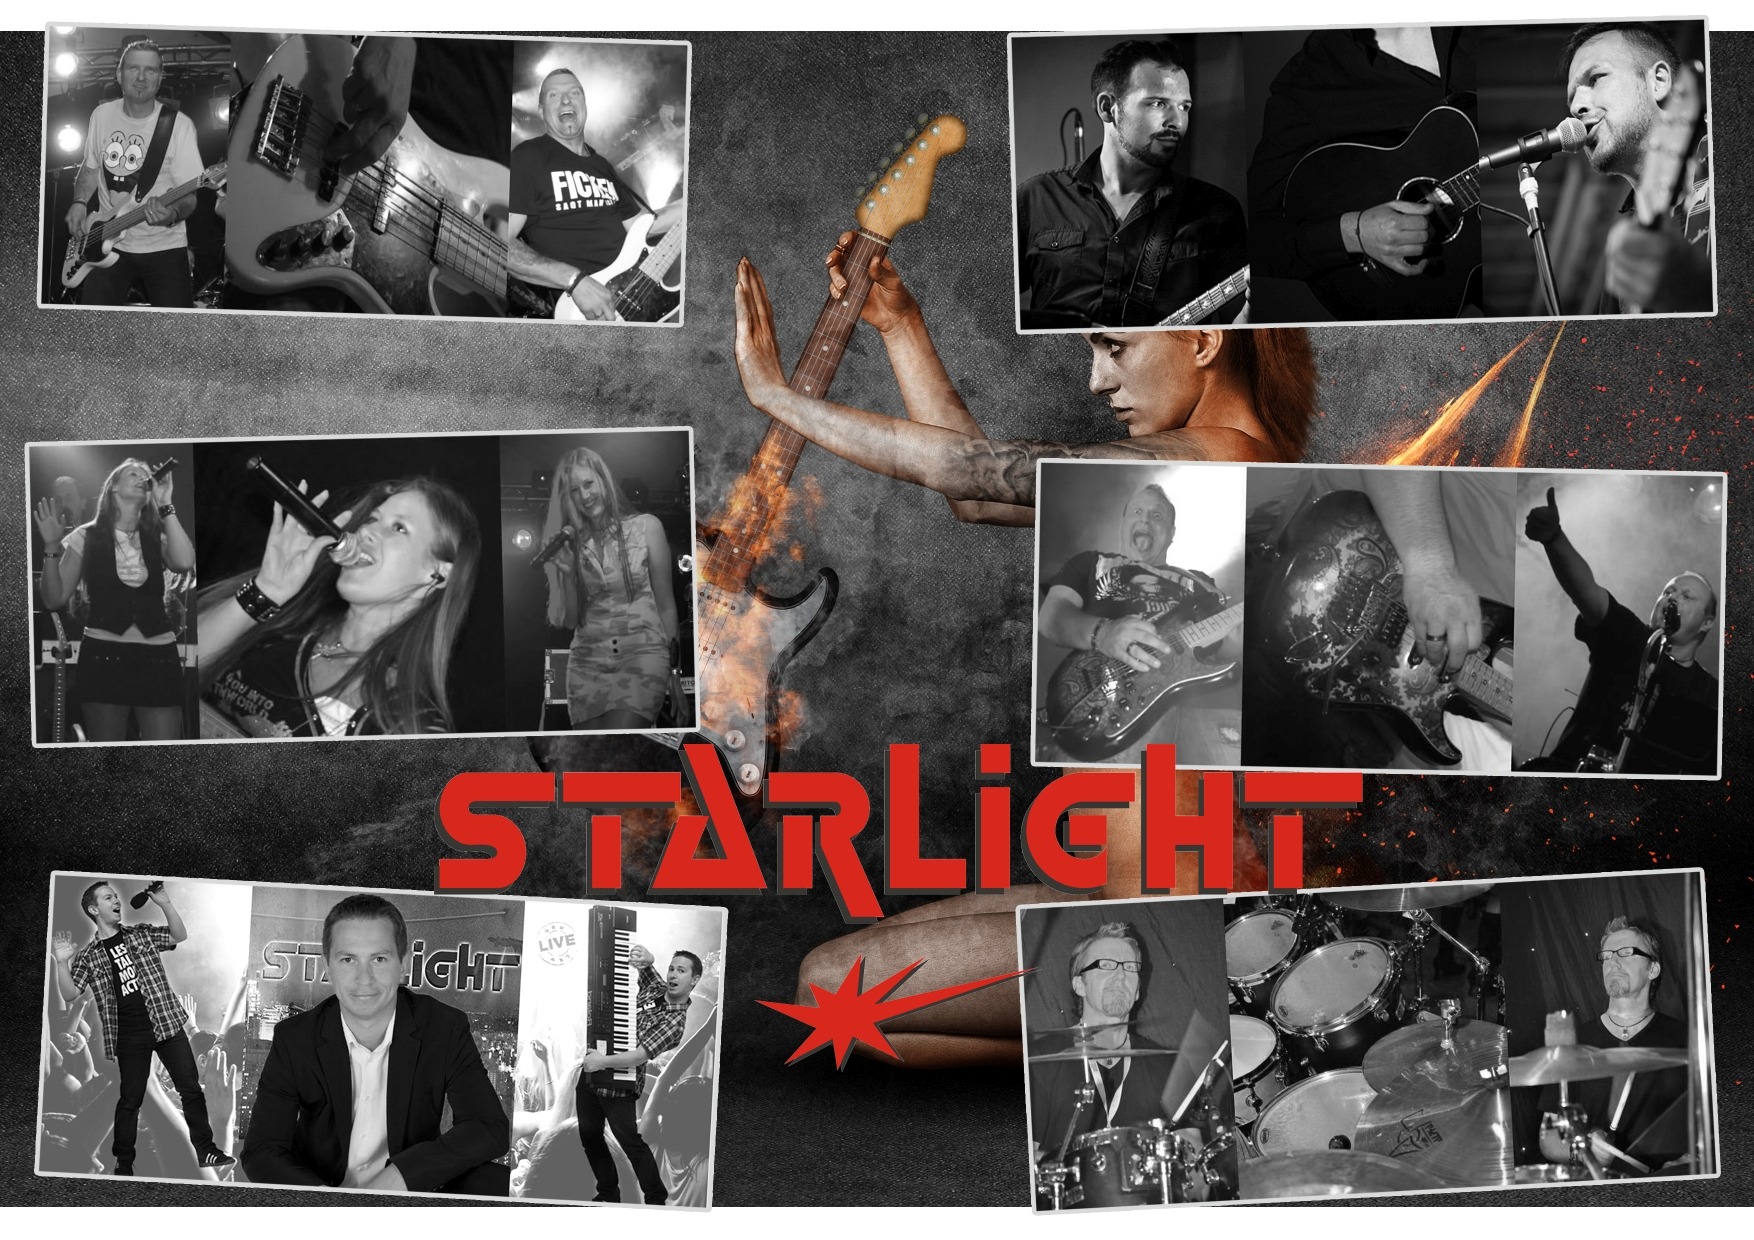 Starlight am Stadtfest Marchtrenk